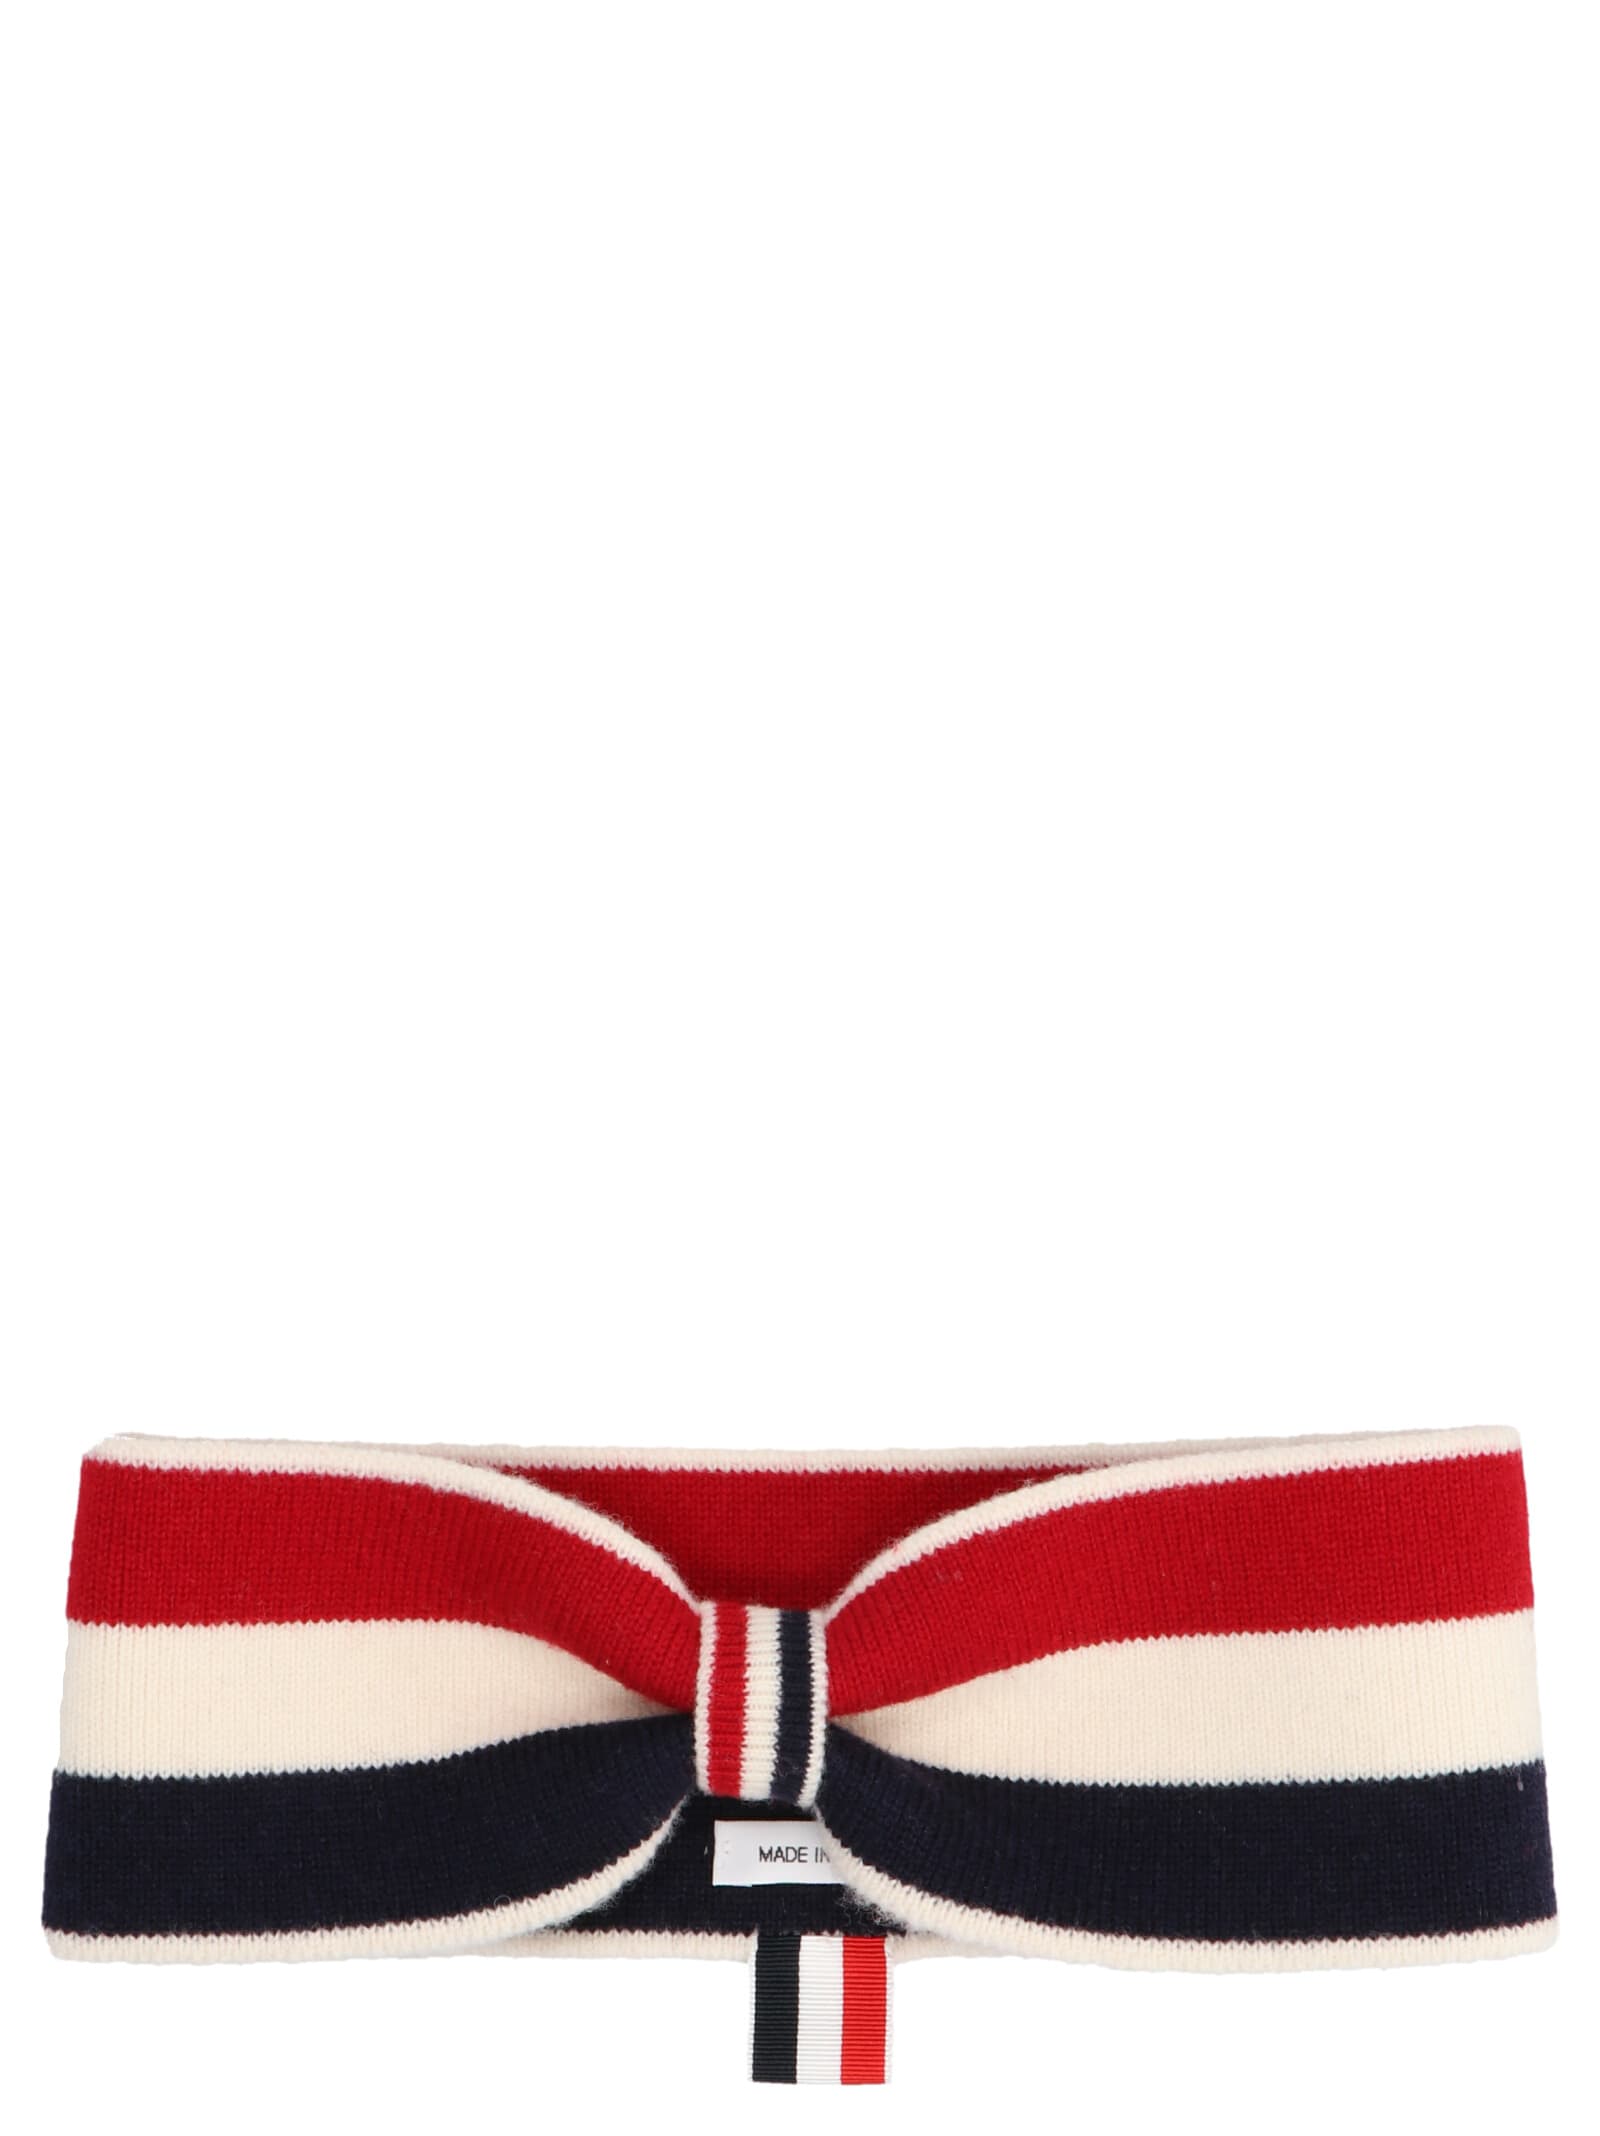 Thom Browne Knot Striped Band